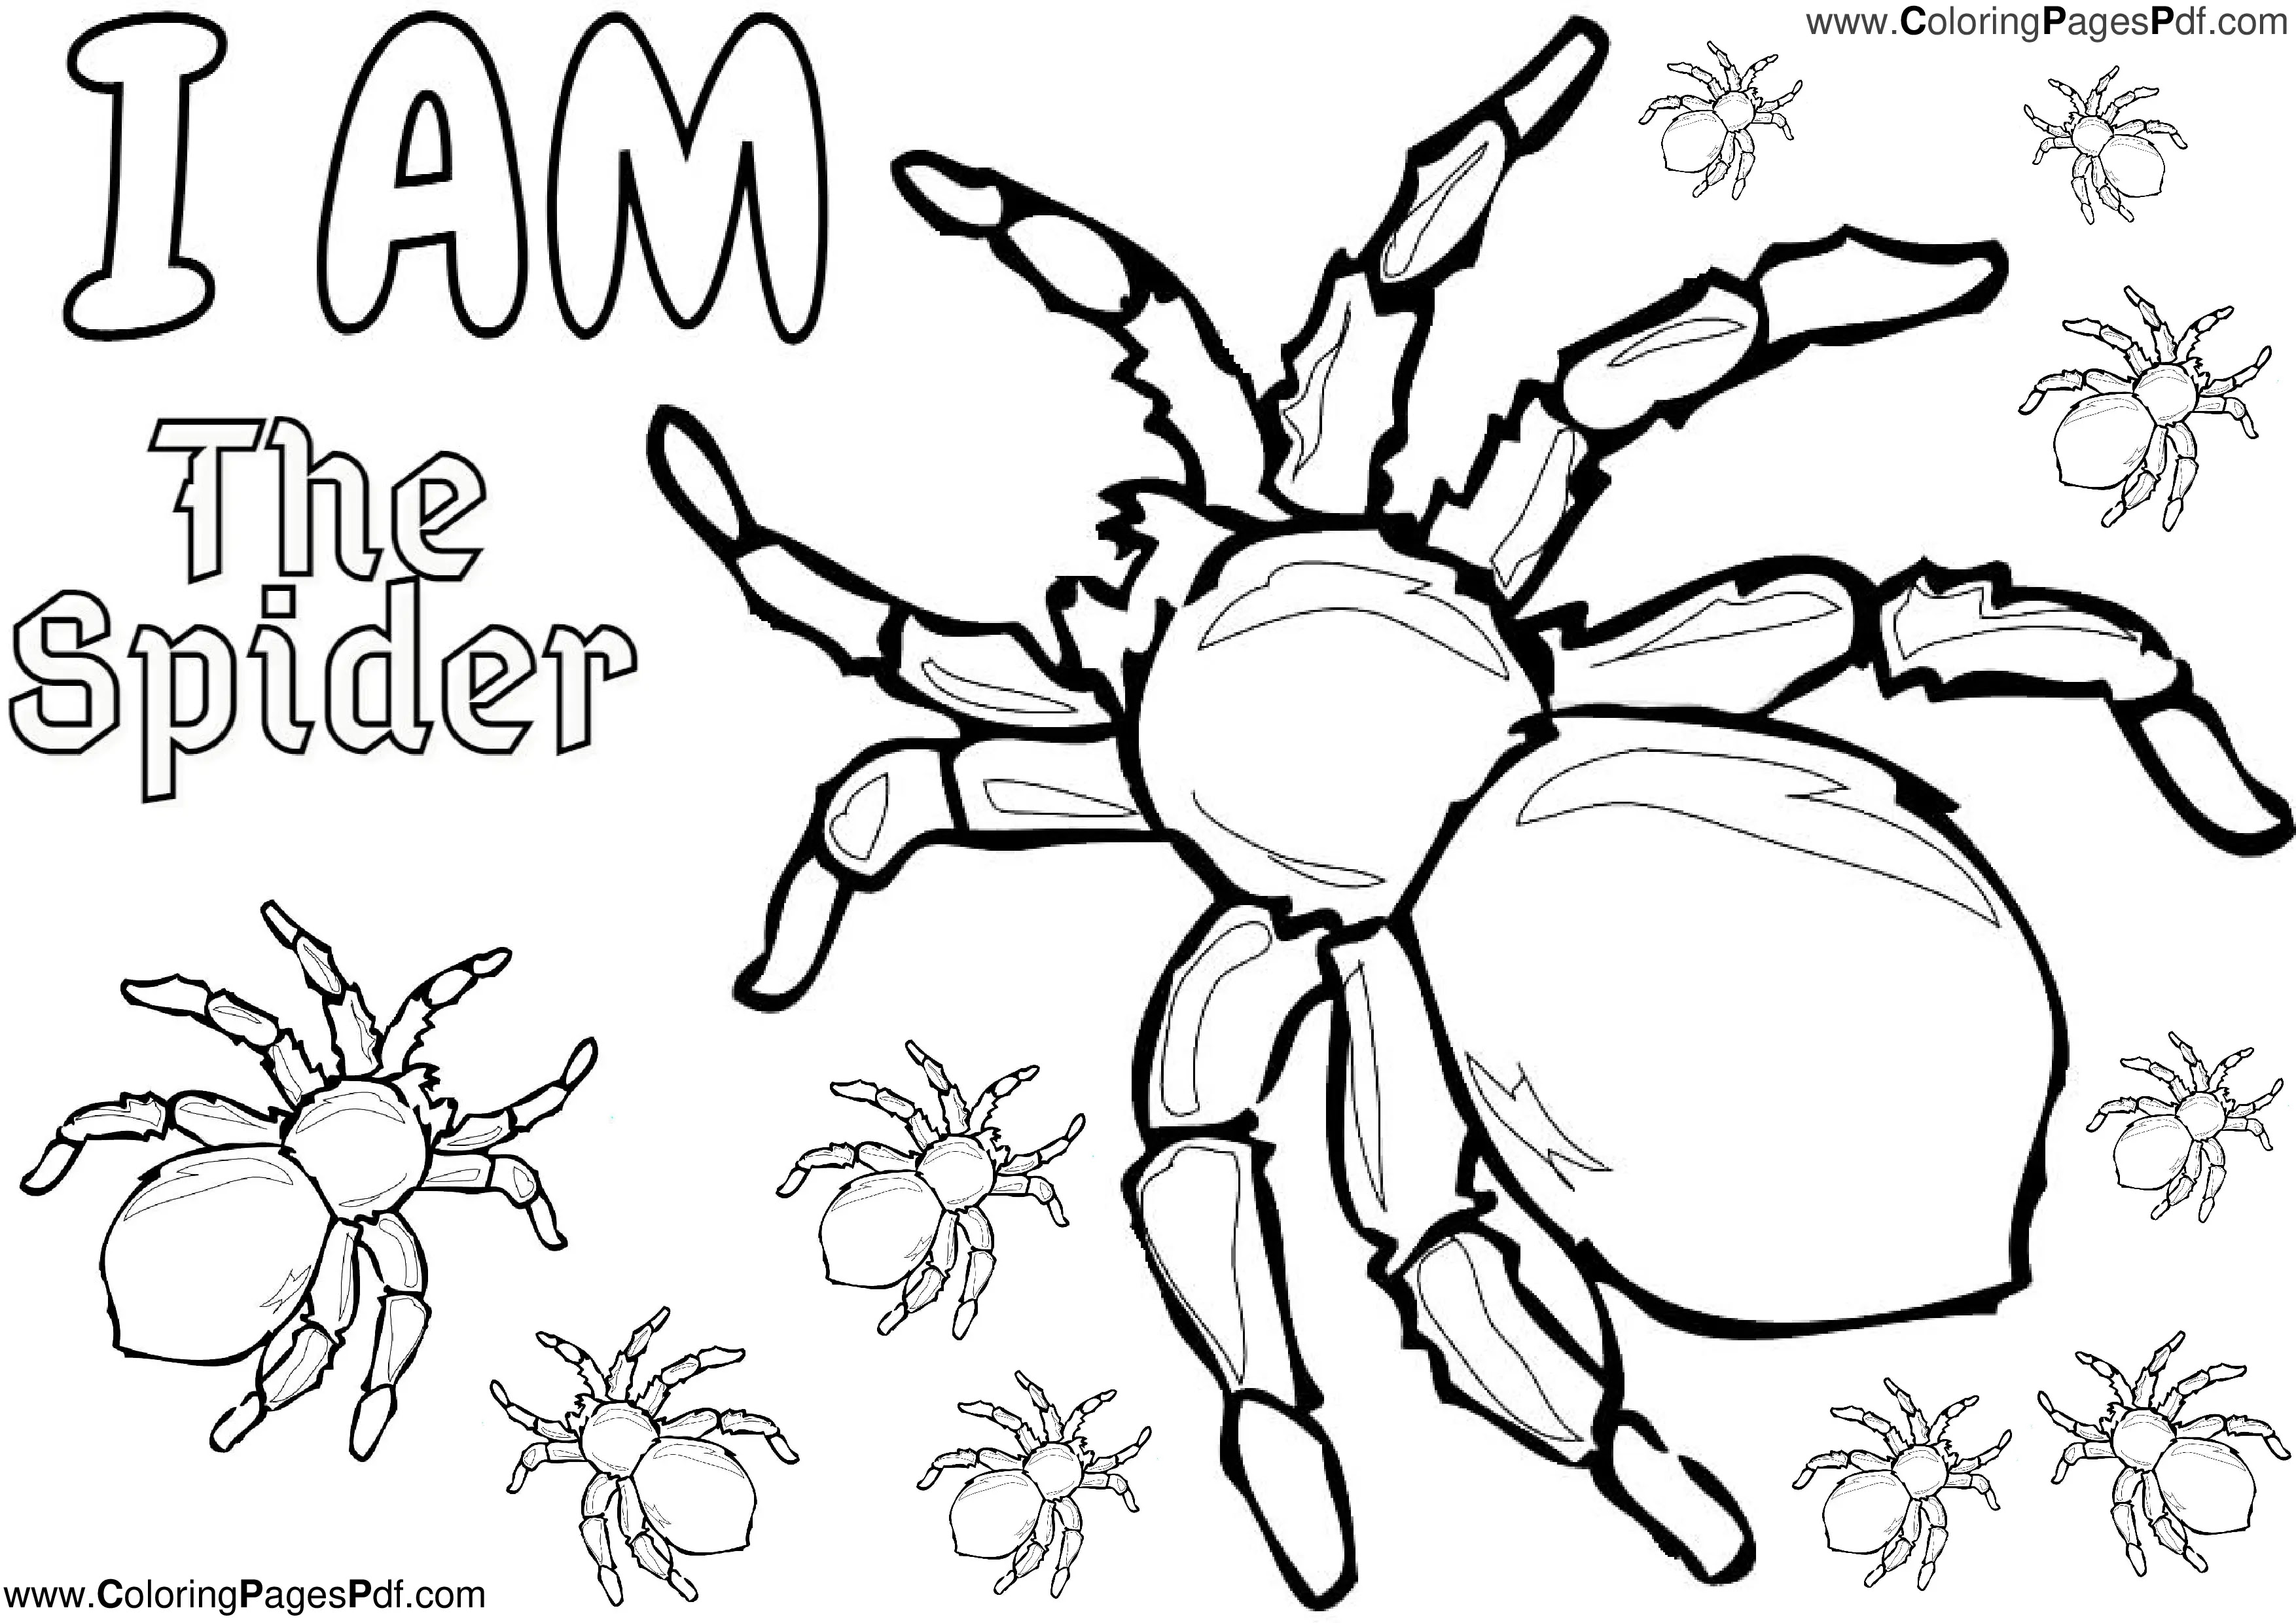 spider man coloring sheets,free spiderman coloring pages,spider man coloring sheets free,spider web coloring page,spiderman pictures to color,spiderman printable coloring pages,free printable spiderman coloring pages,spider coloring,print spiderman coloring pages,spider coloring pages,spiderman coloring pages,spiderman coloring,miles morales coloring book,spiderman colouring book